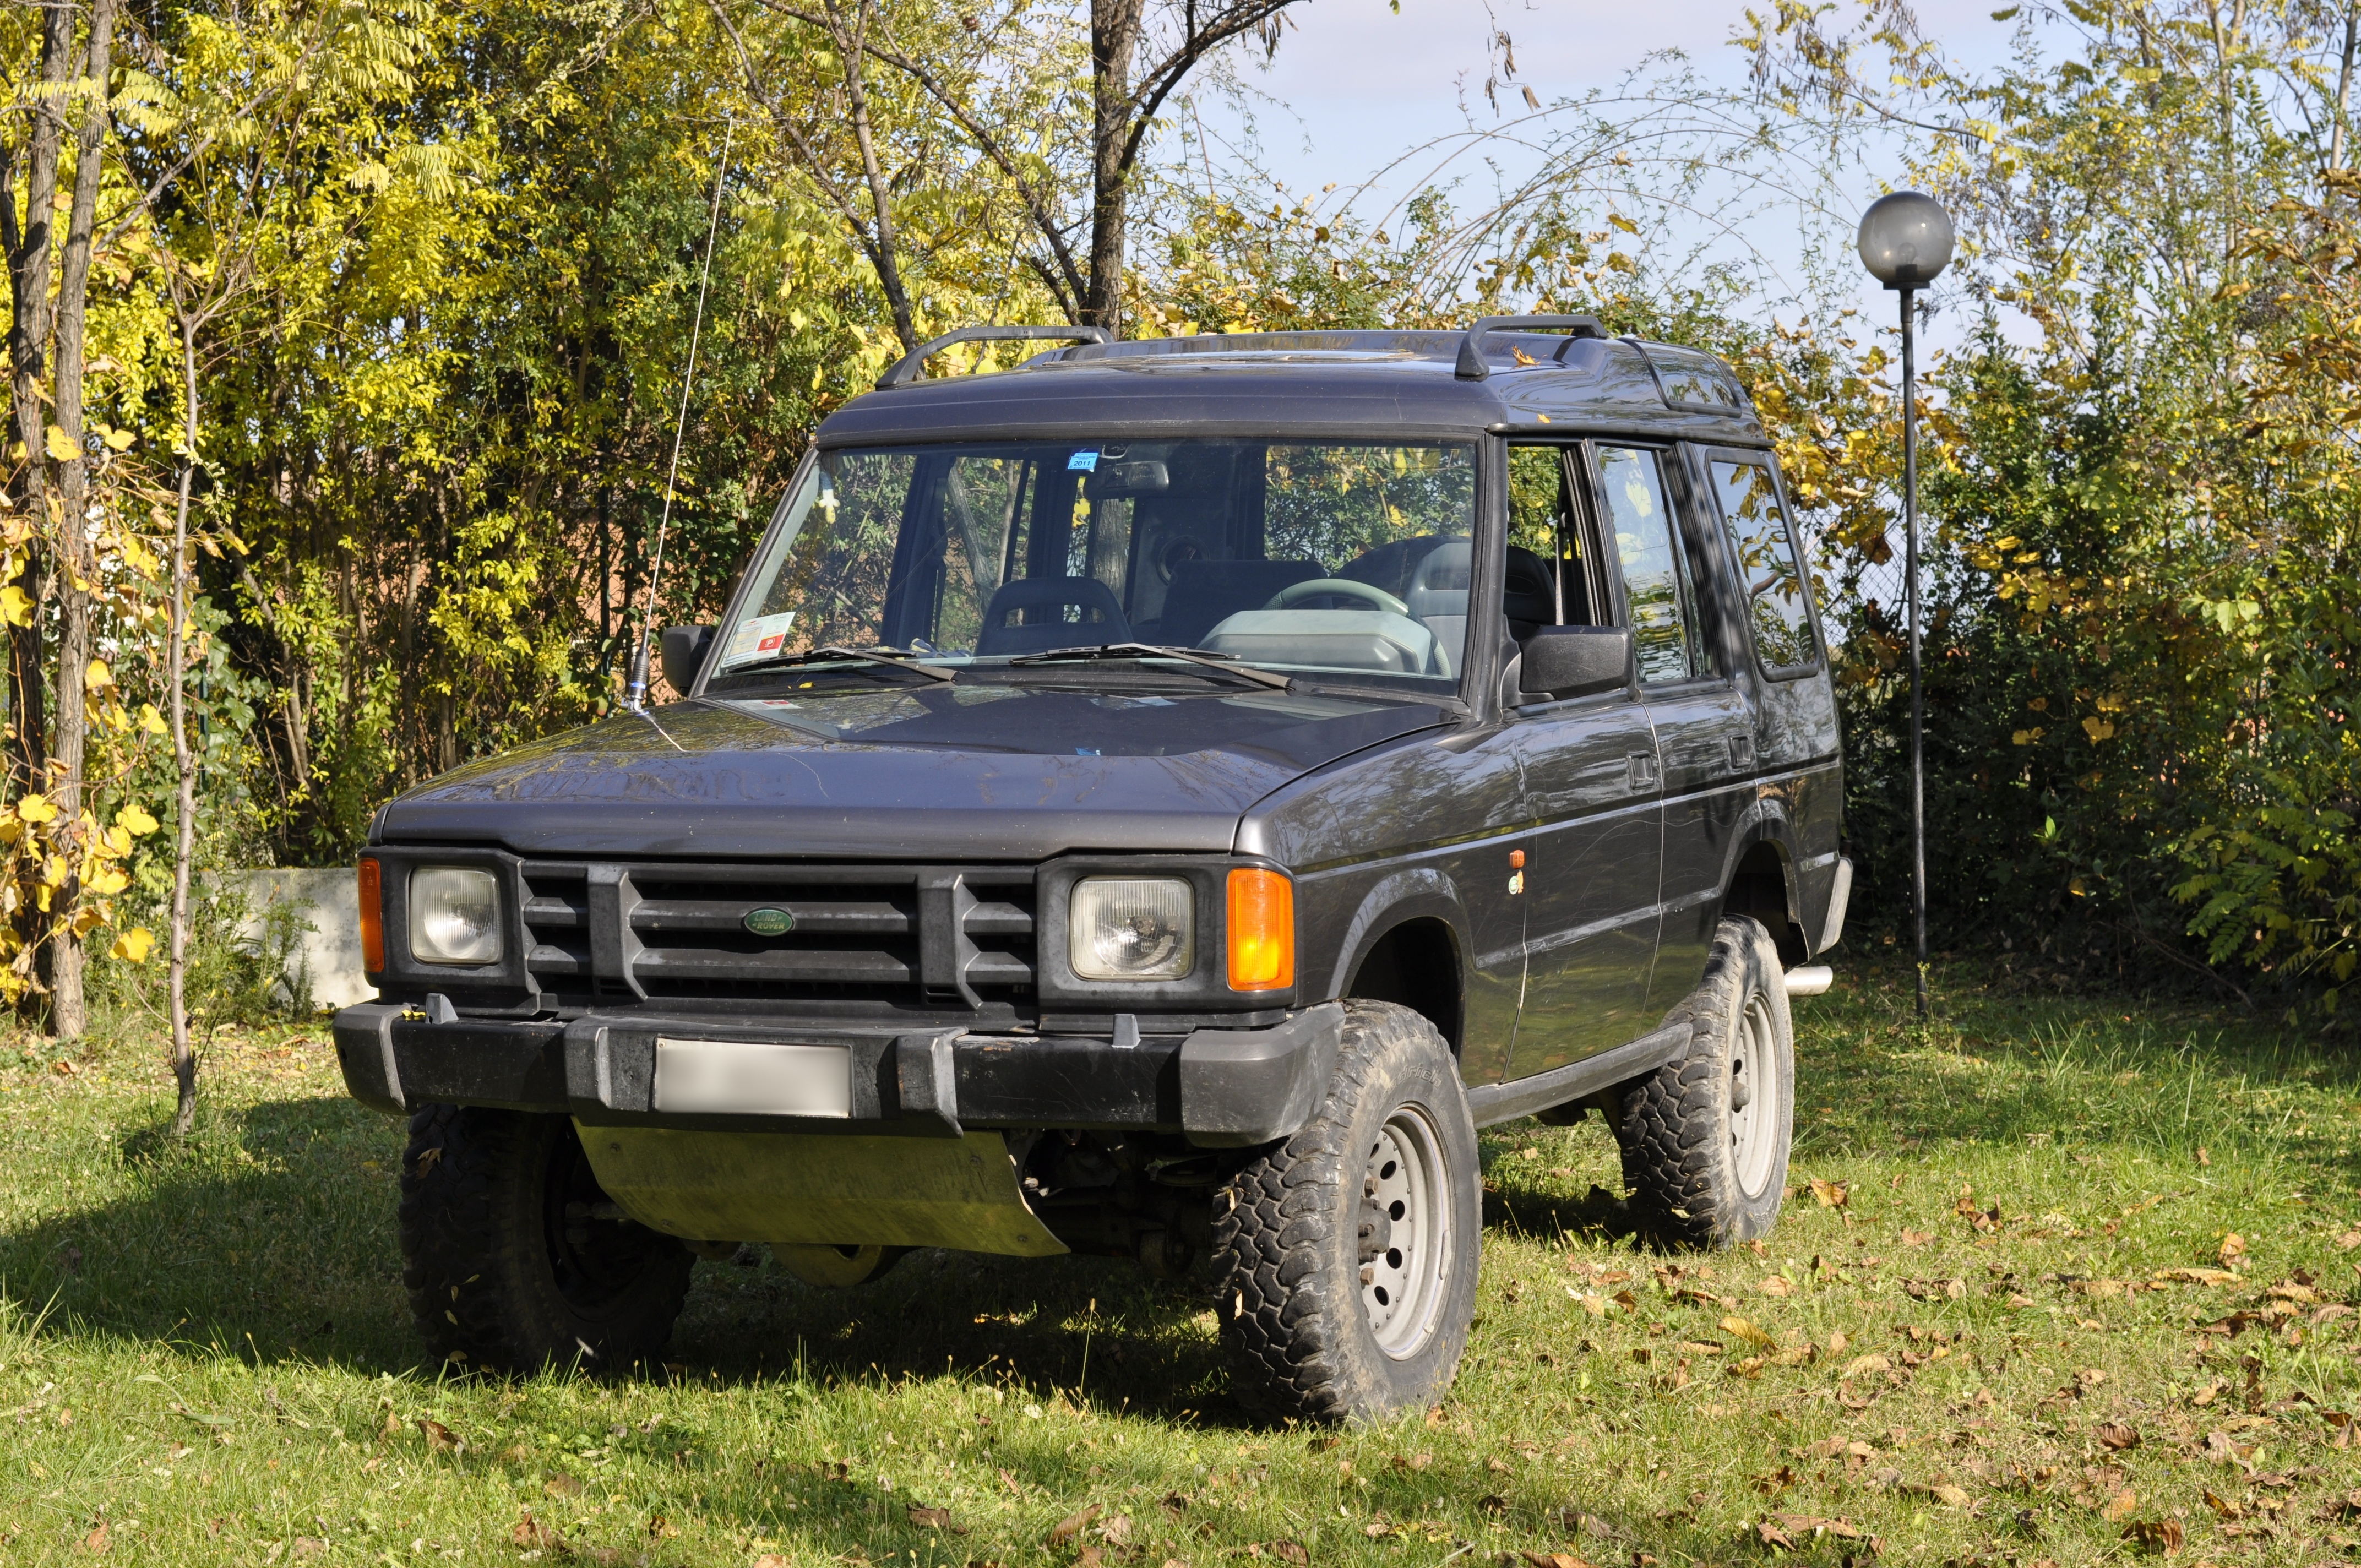 DSC9354 Land Rover Discovery 200 TDi Photo album by Jstrang